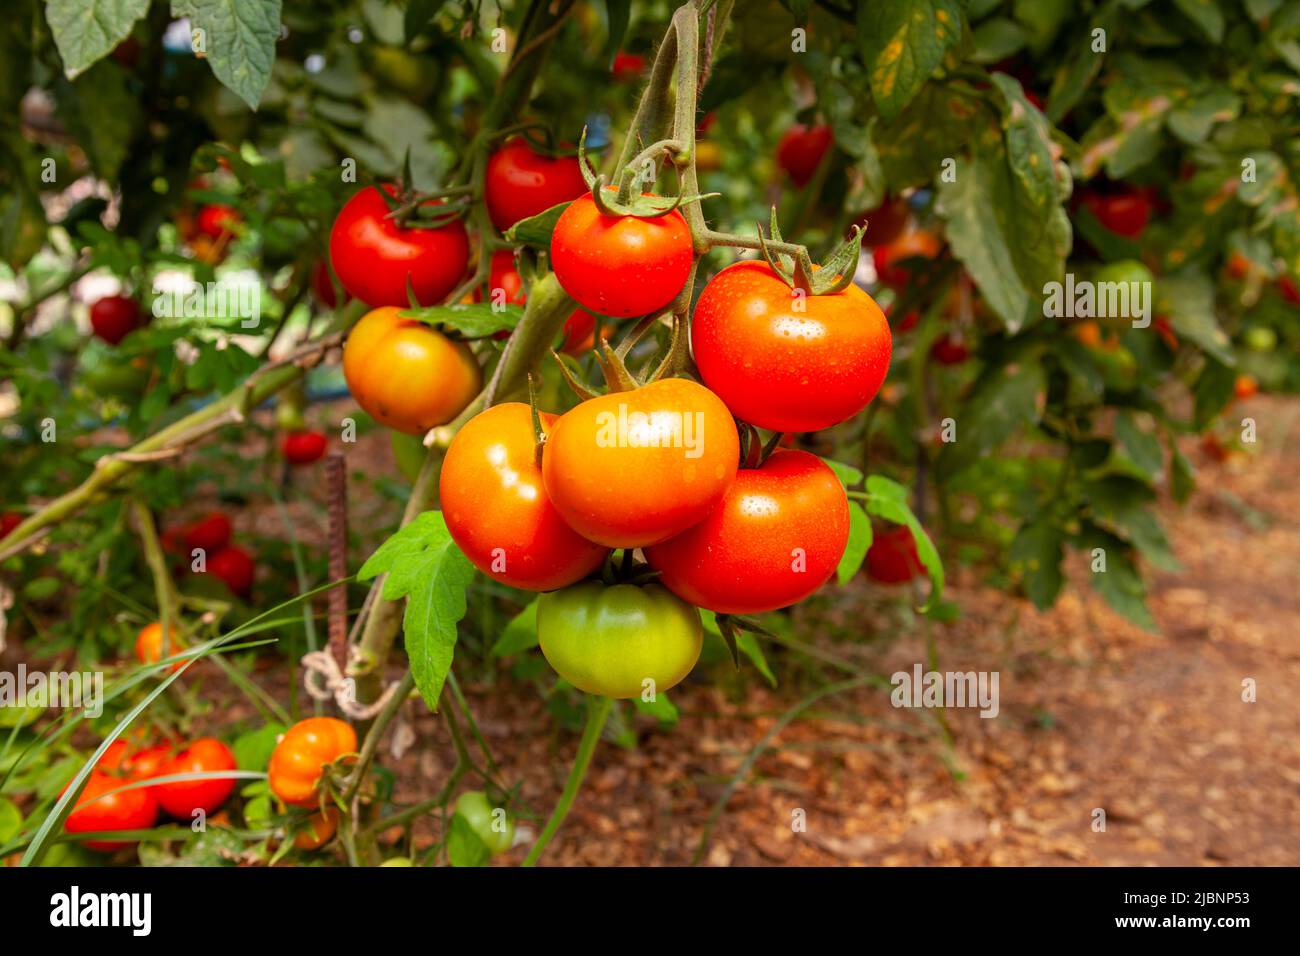 Tomatoes on the branch. Tomato field. Productivity concept. Close-up and selective focus. Stock Photo